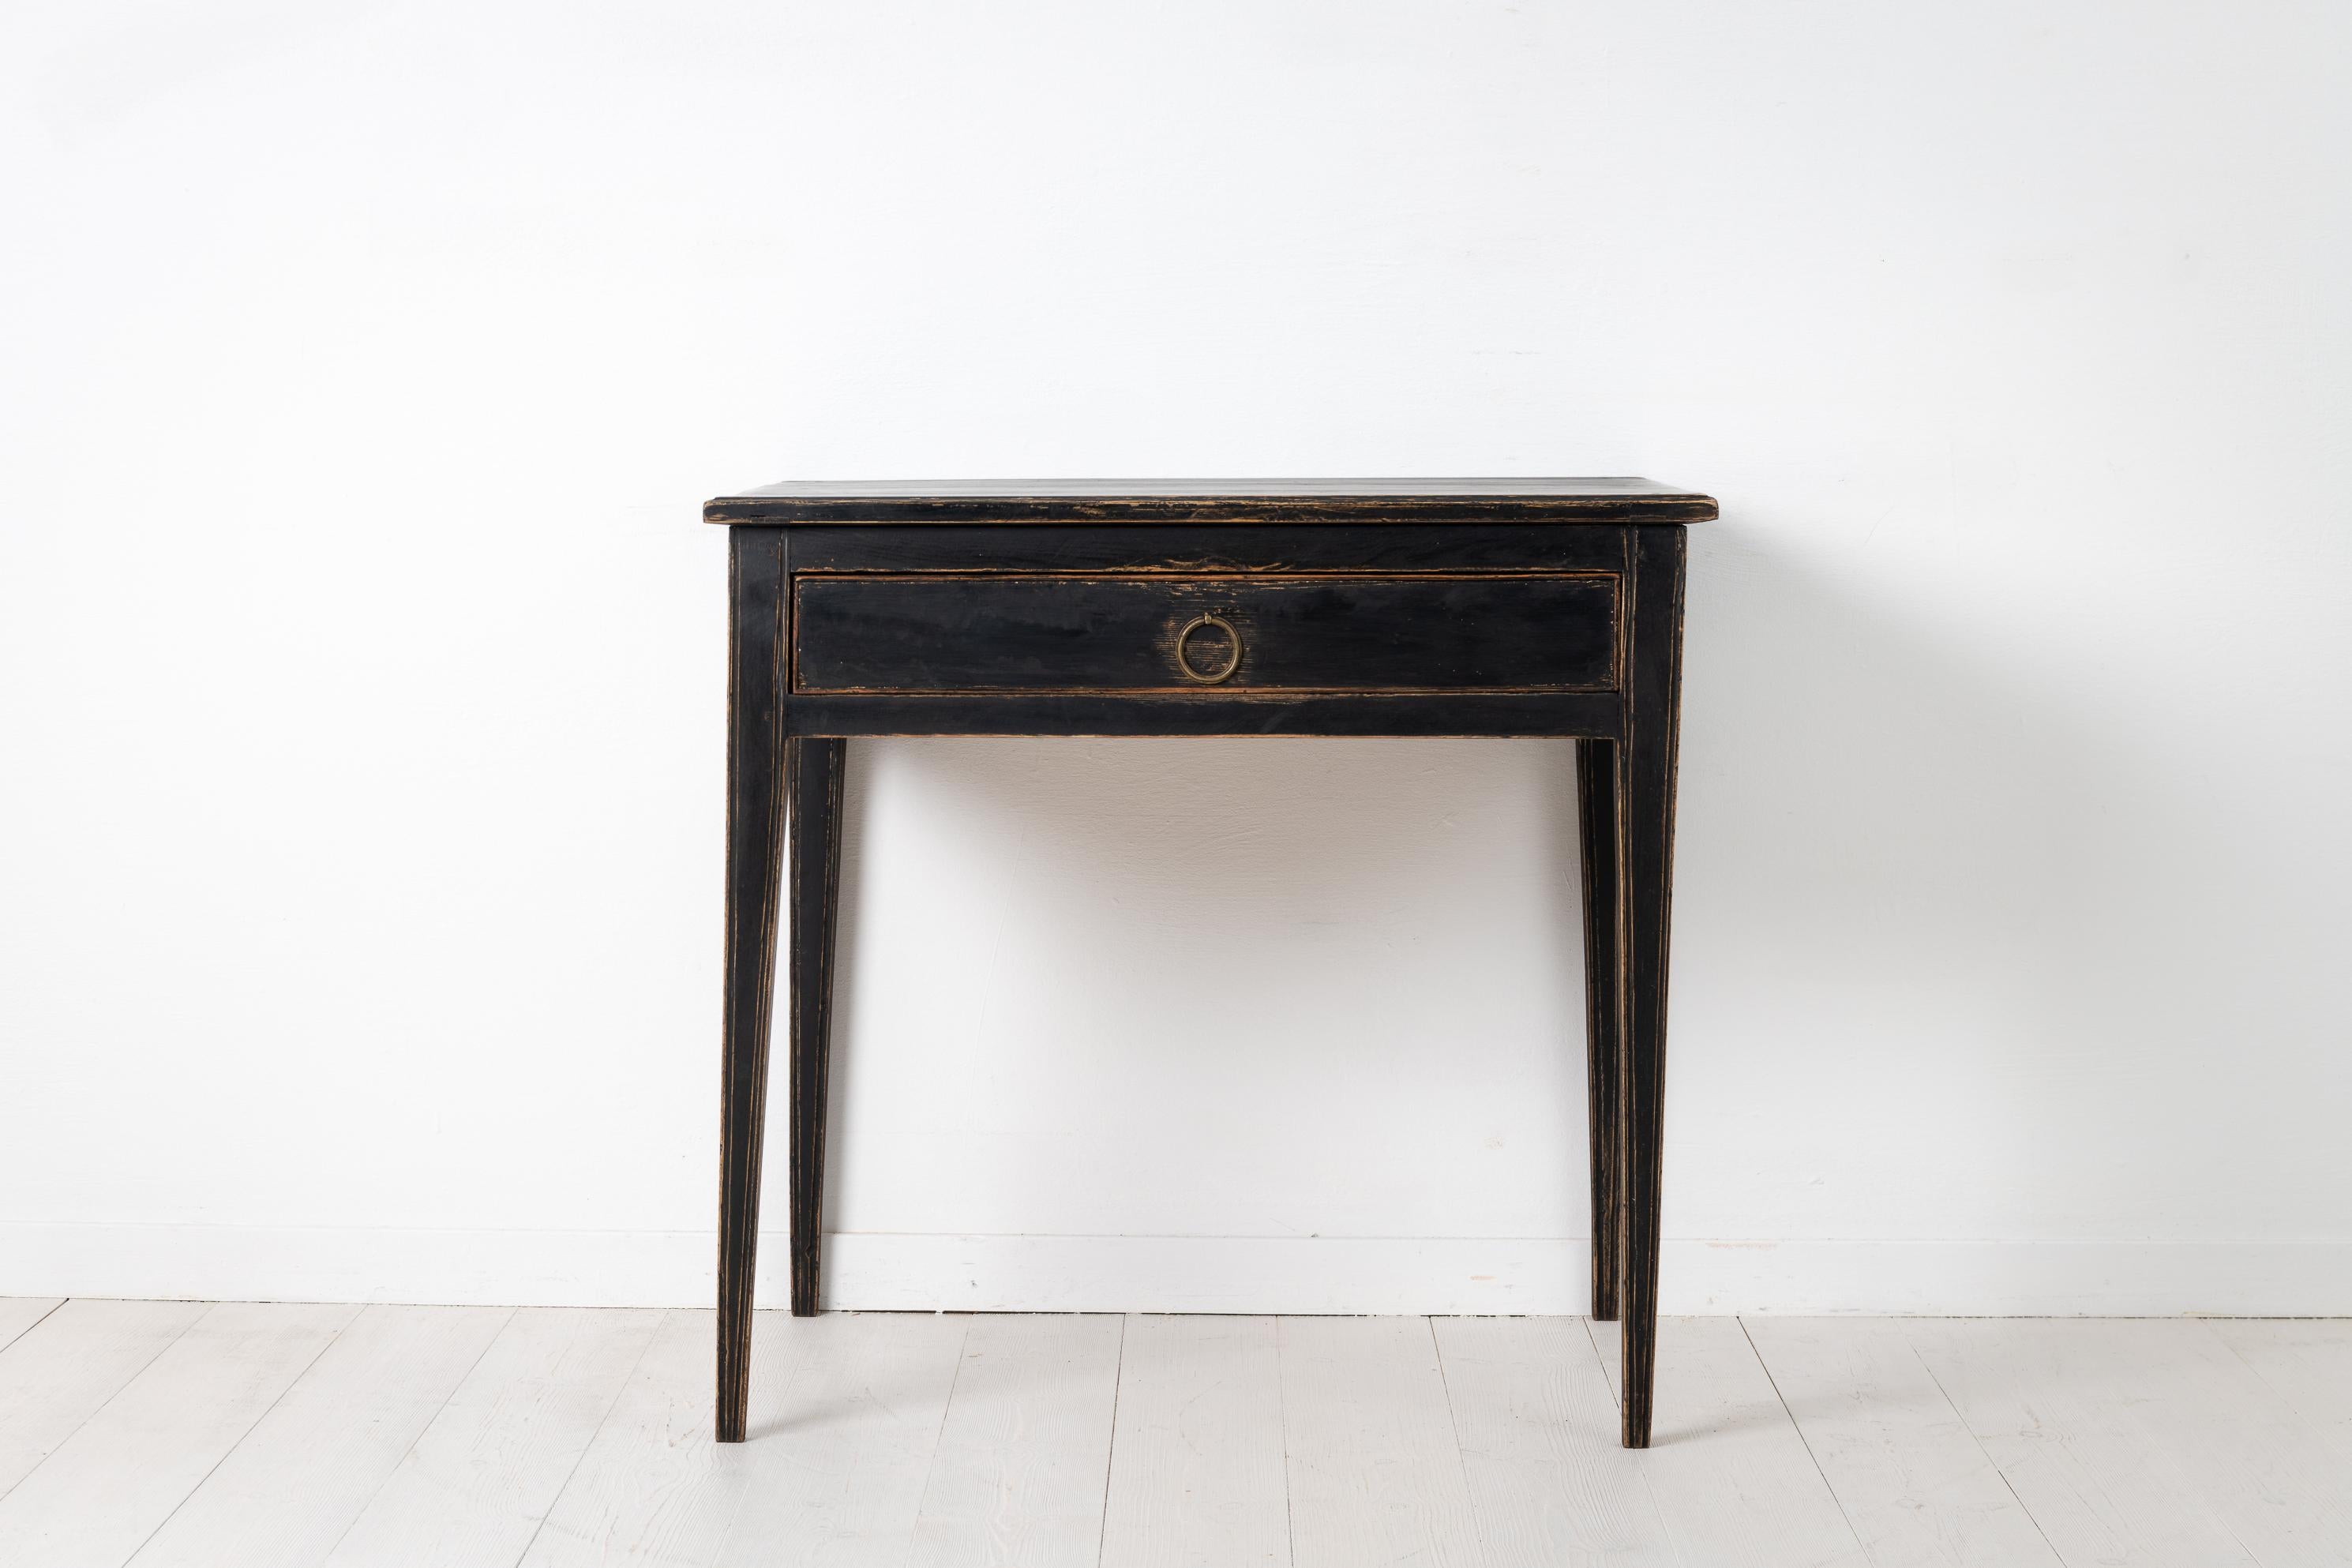 Hand-Crafted Small Black Swedish Gustavian Pine Table or Desk